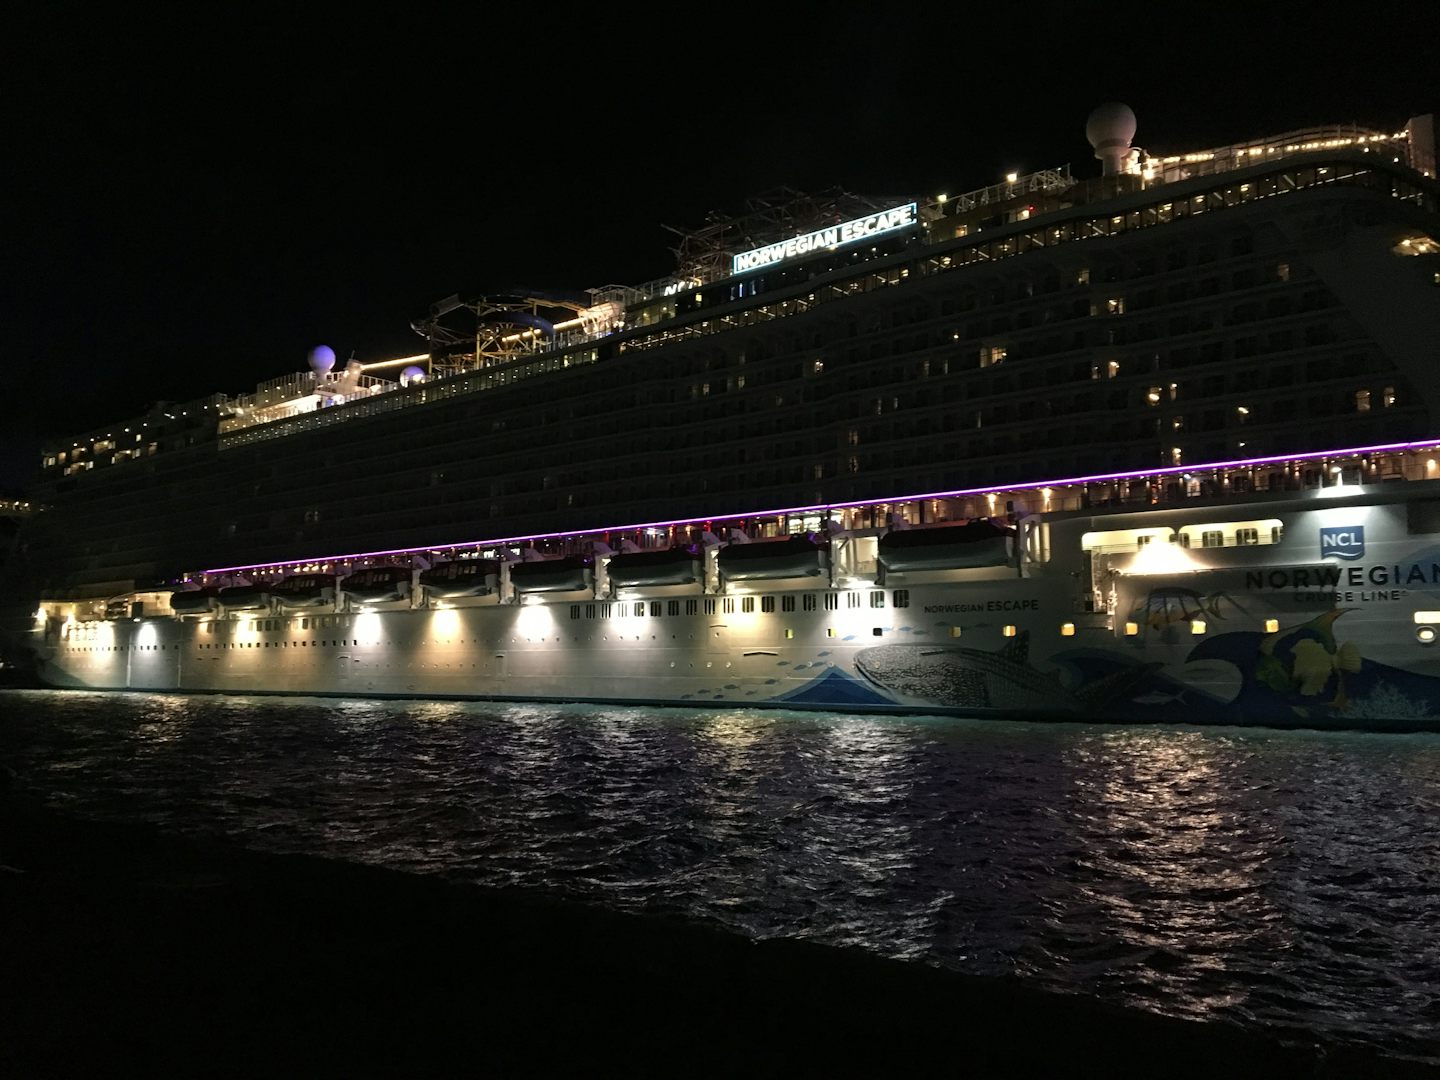 The ship at night in Nassau